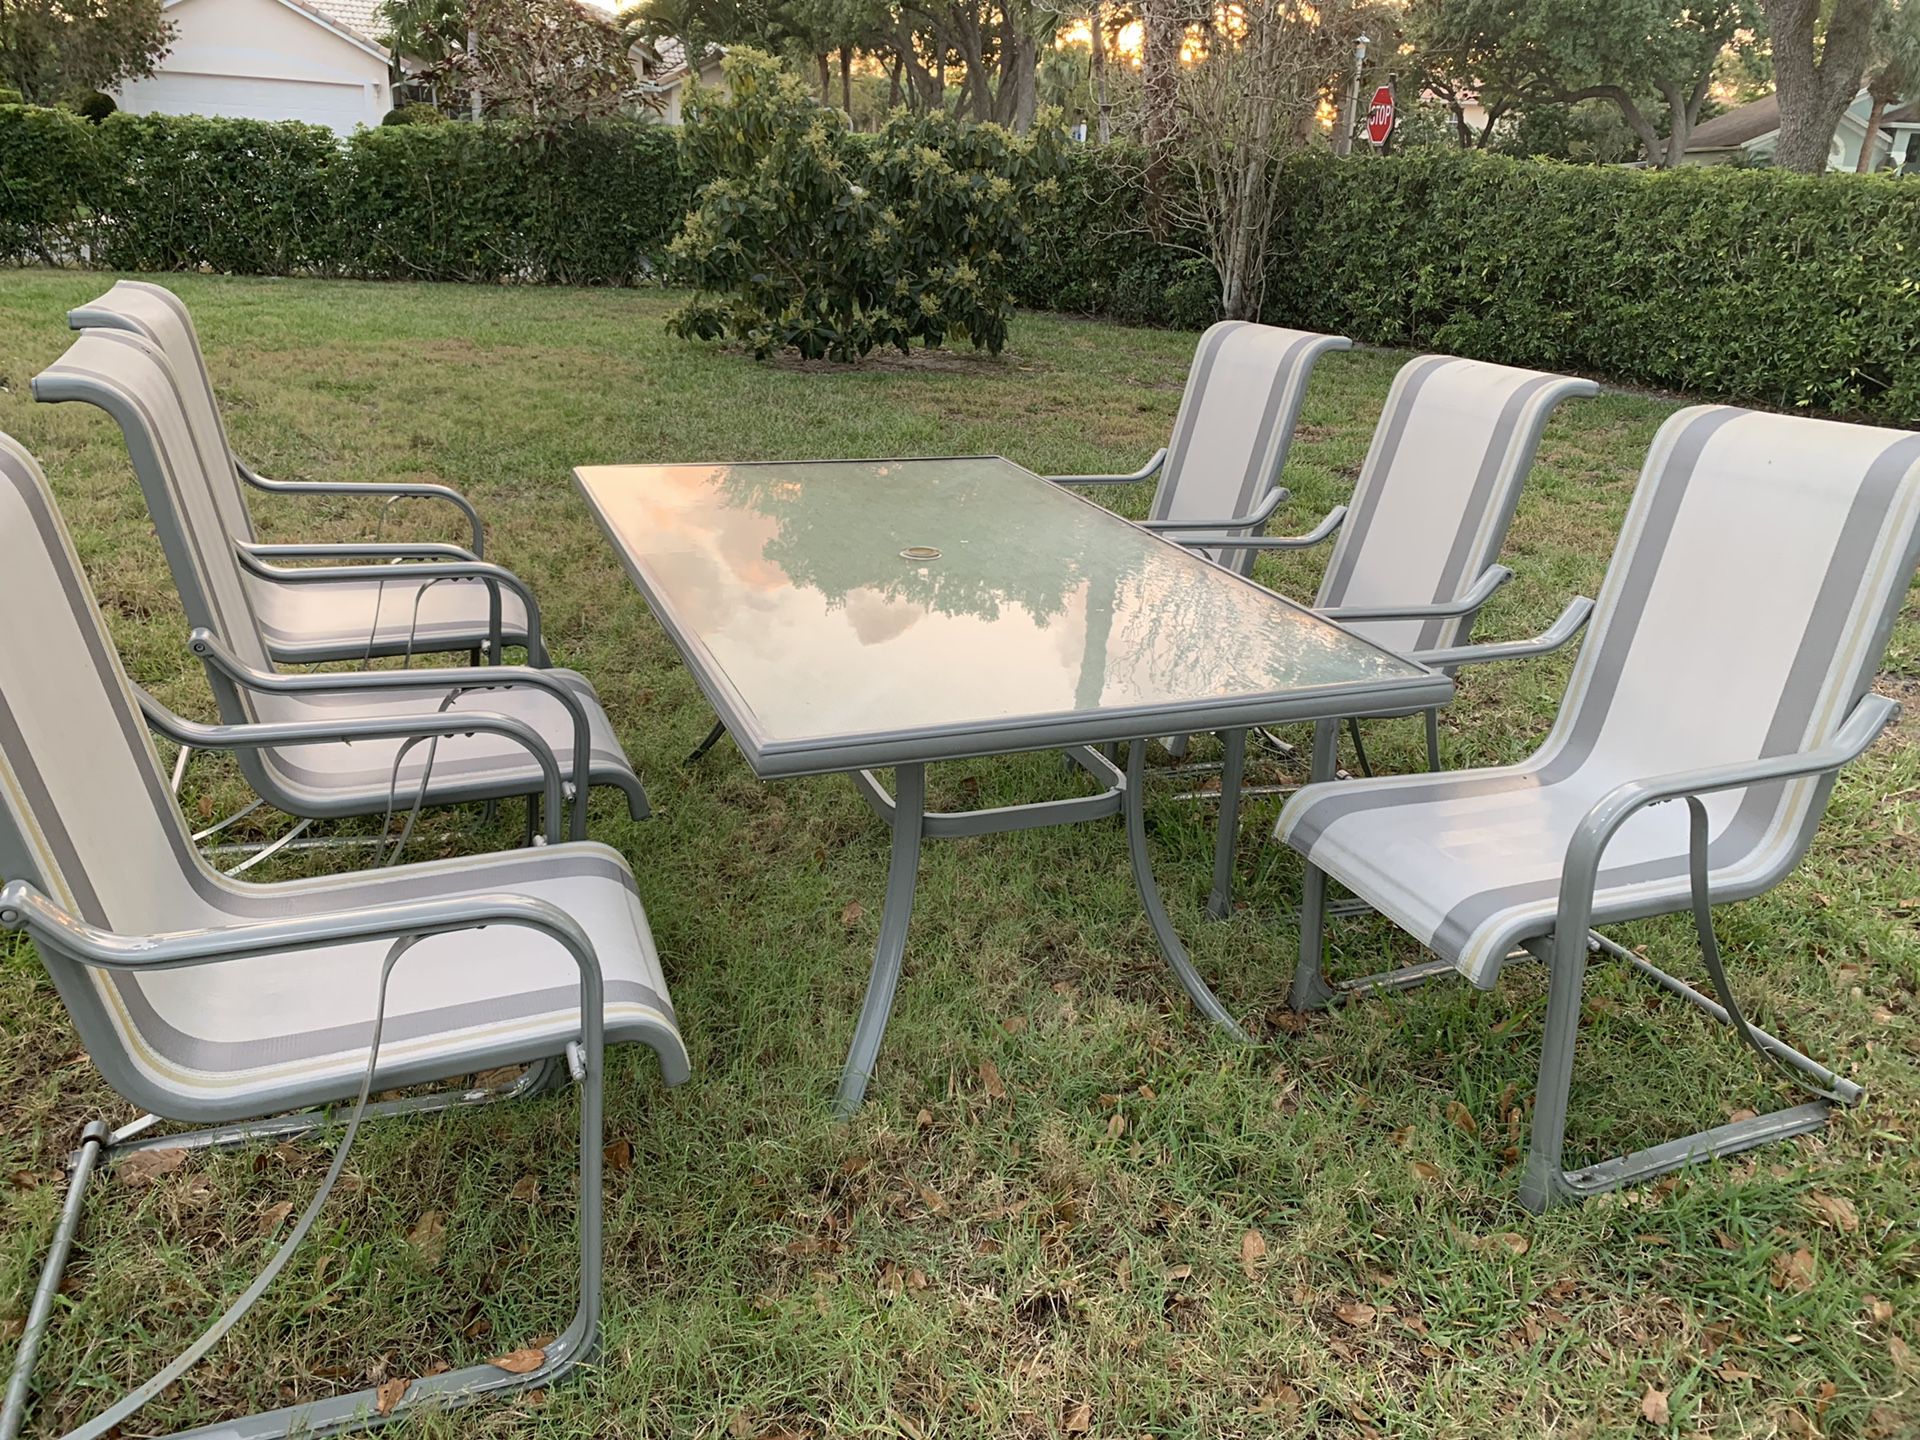 Patio furniture, 6 chairs and table